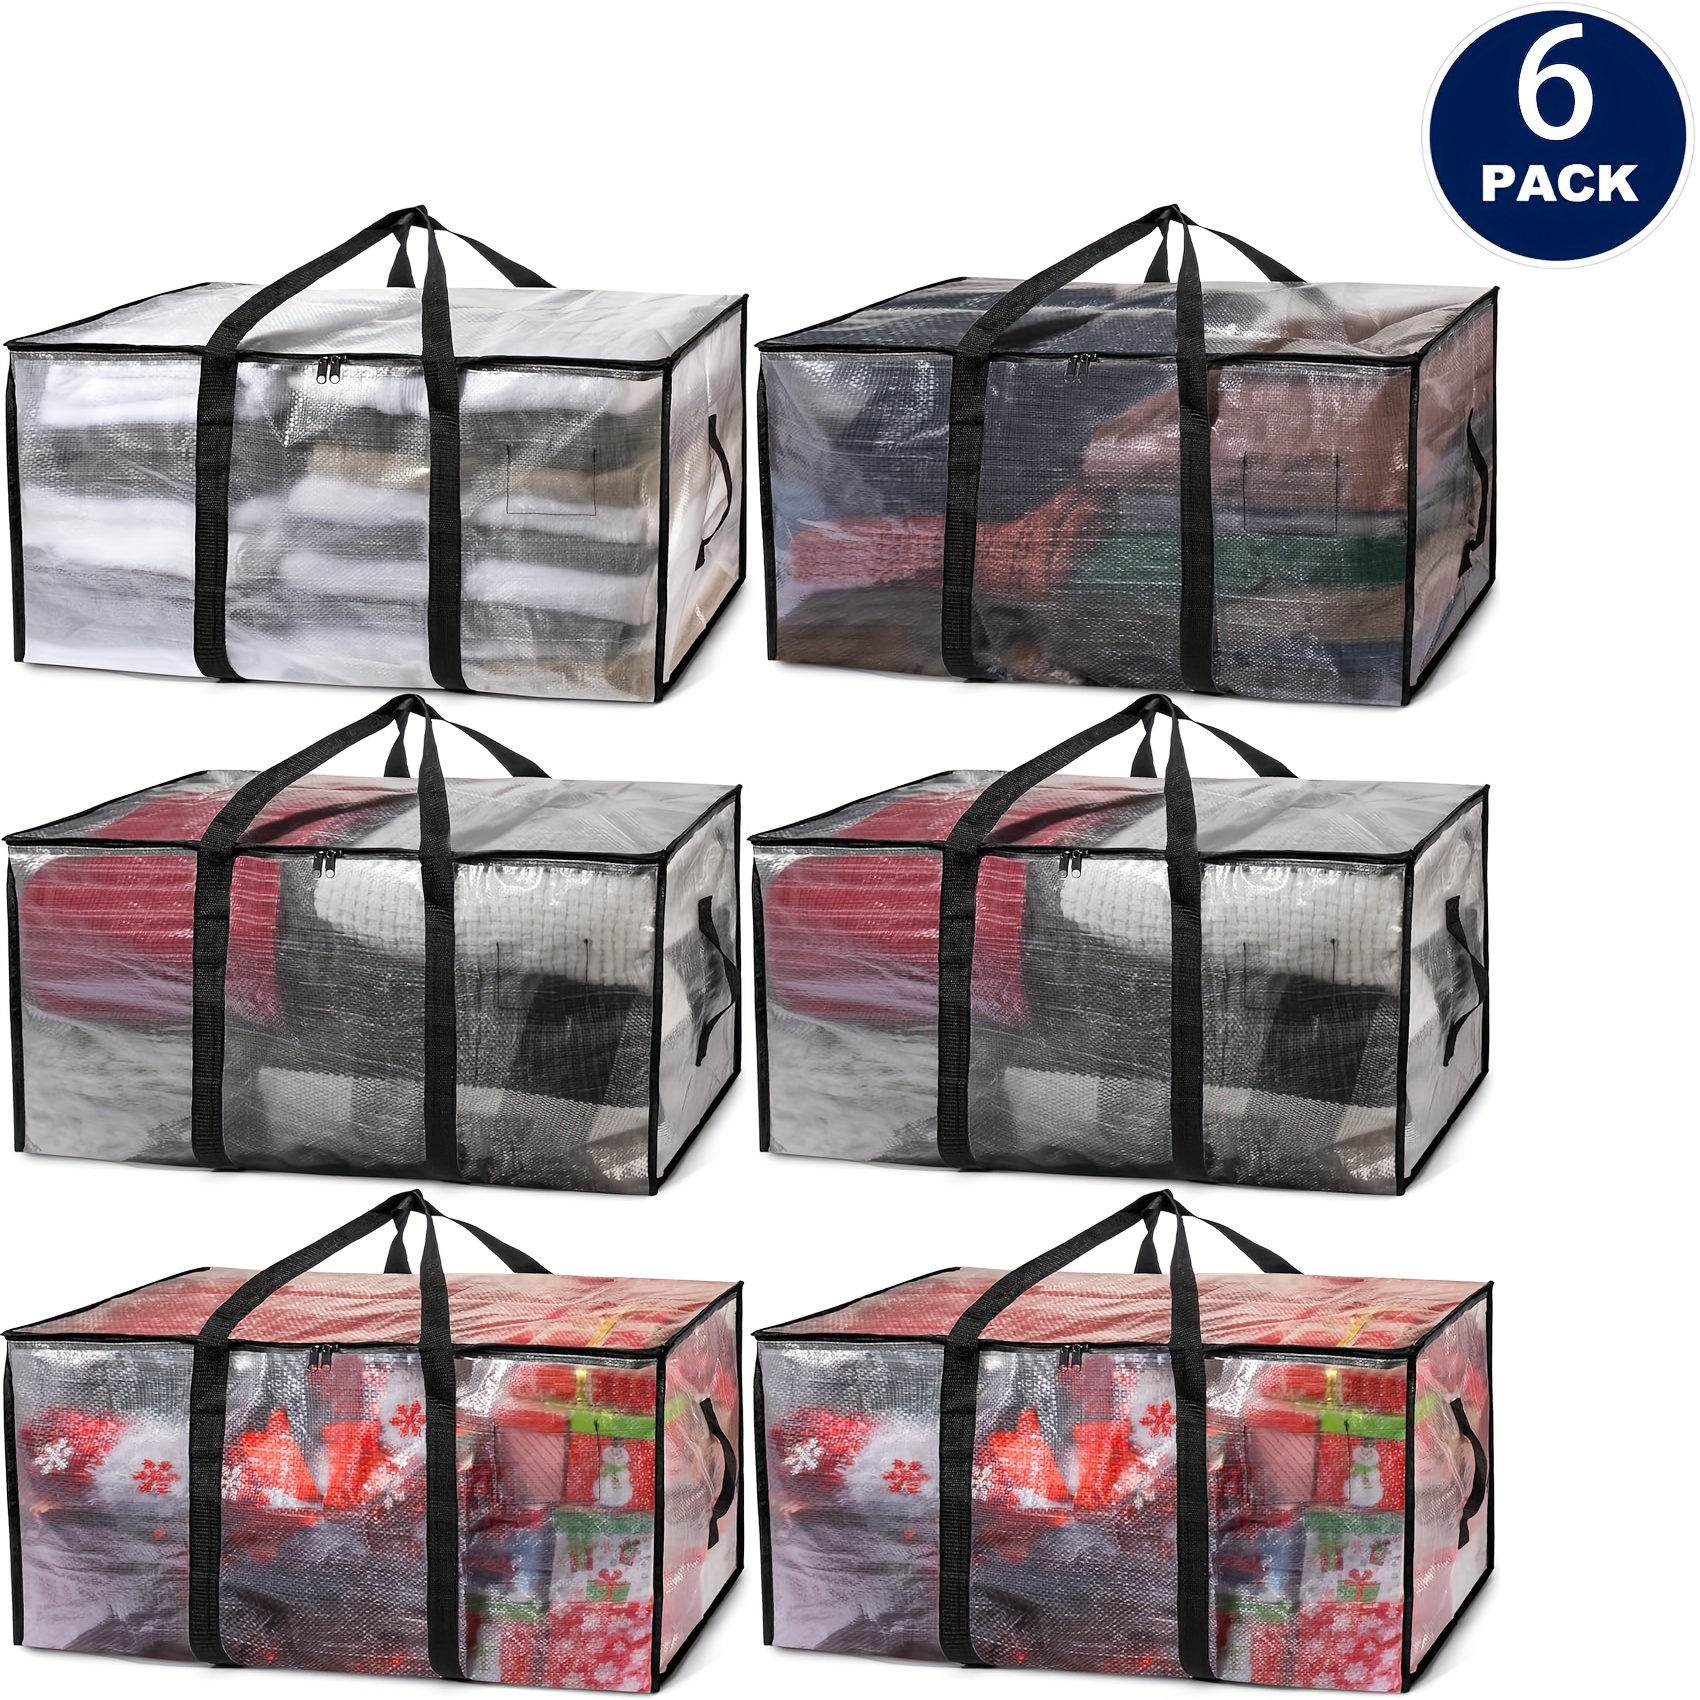 

6pcs Extra Large Moving Bags With Zippers & Handles, Heavy-duty Tote Storage Bin, Clear Plastic Packing Sacks For Moving, College Dorms, Ideal Home Supplies